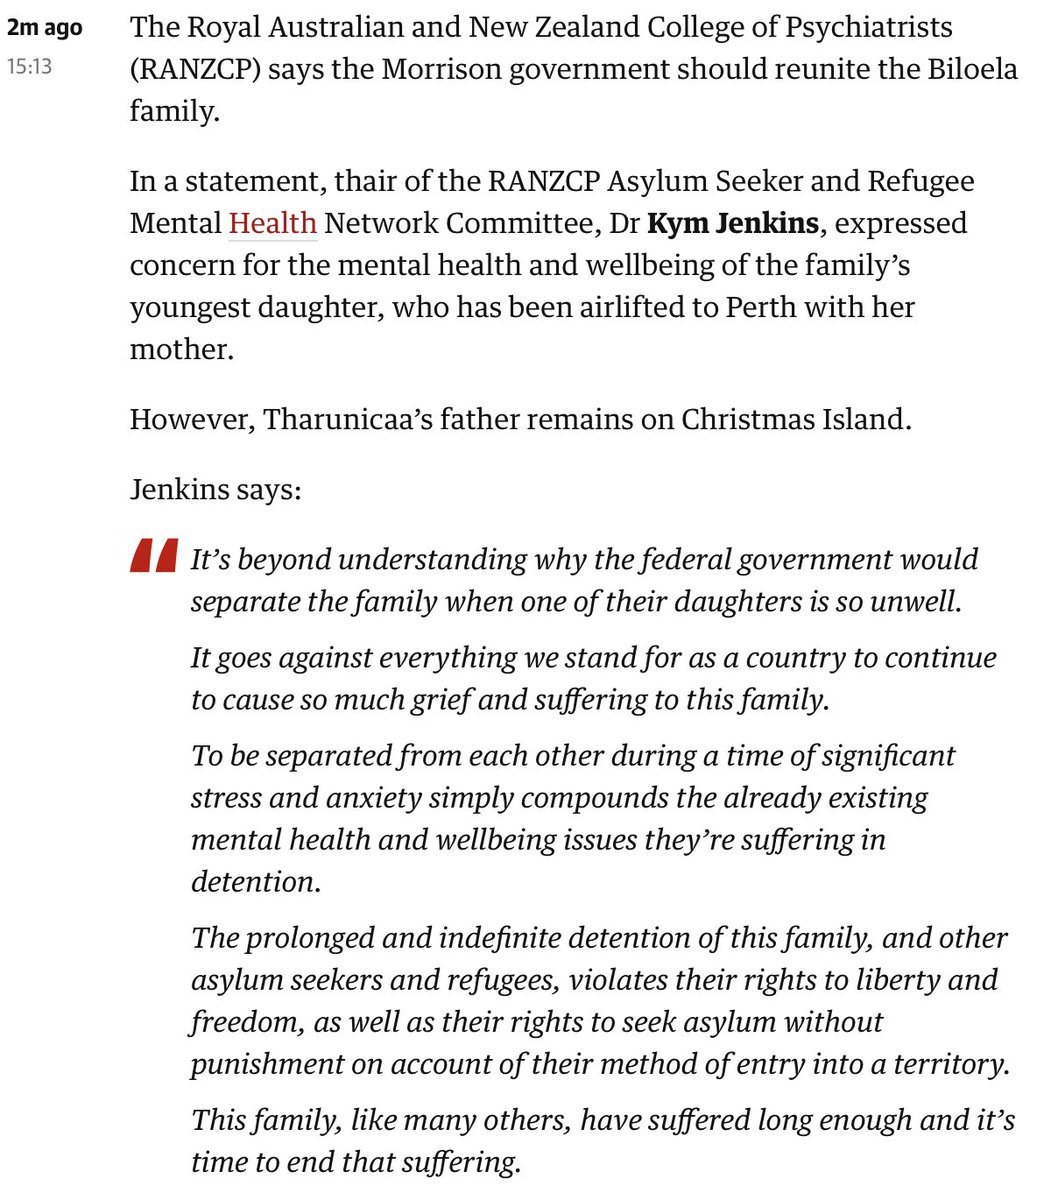 Royal Aust & NZ College of Psychiatrists statement on the #BiloelaFamily being reunited. 
That RANZCP has to issue this statement is an appalling but unsurprising indictment on the Morrison govt. #HometoBiloela #GAMEOVER #CompassionNotCruelty #auspol #Tharnicaa